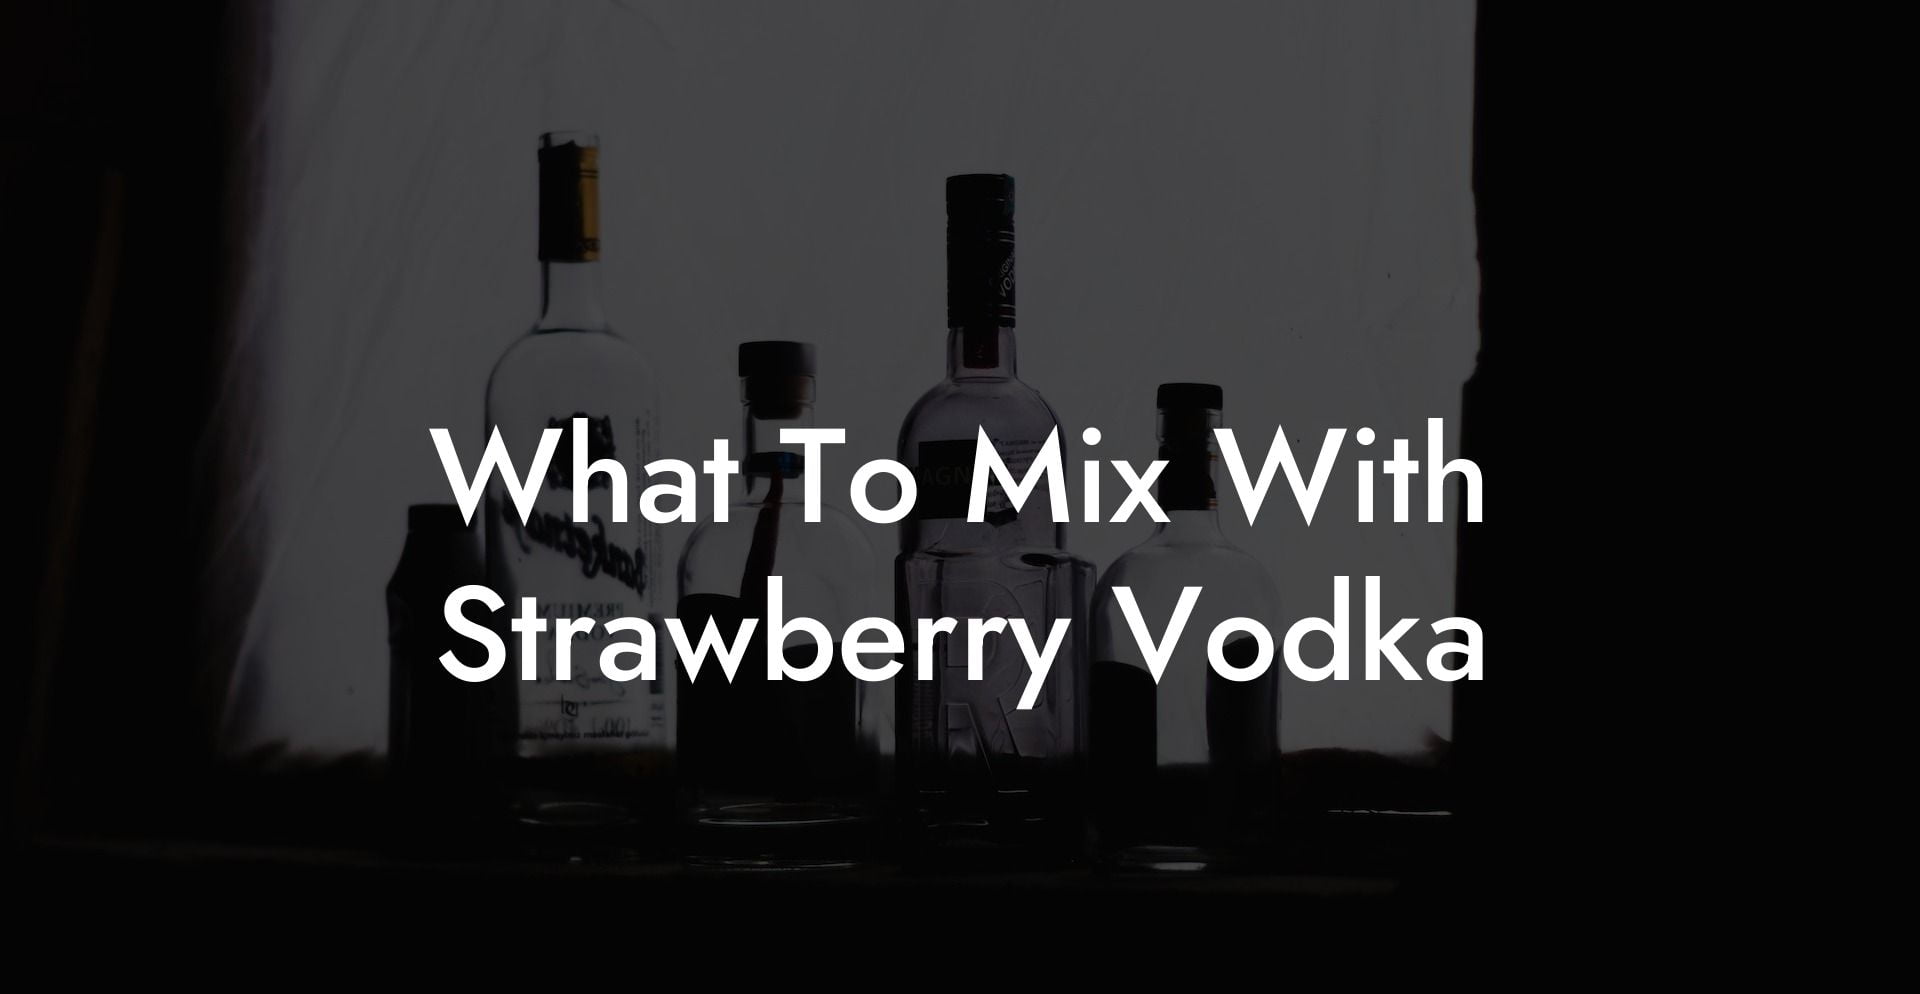 What To Mix With Strawberry Vodka